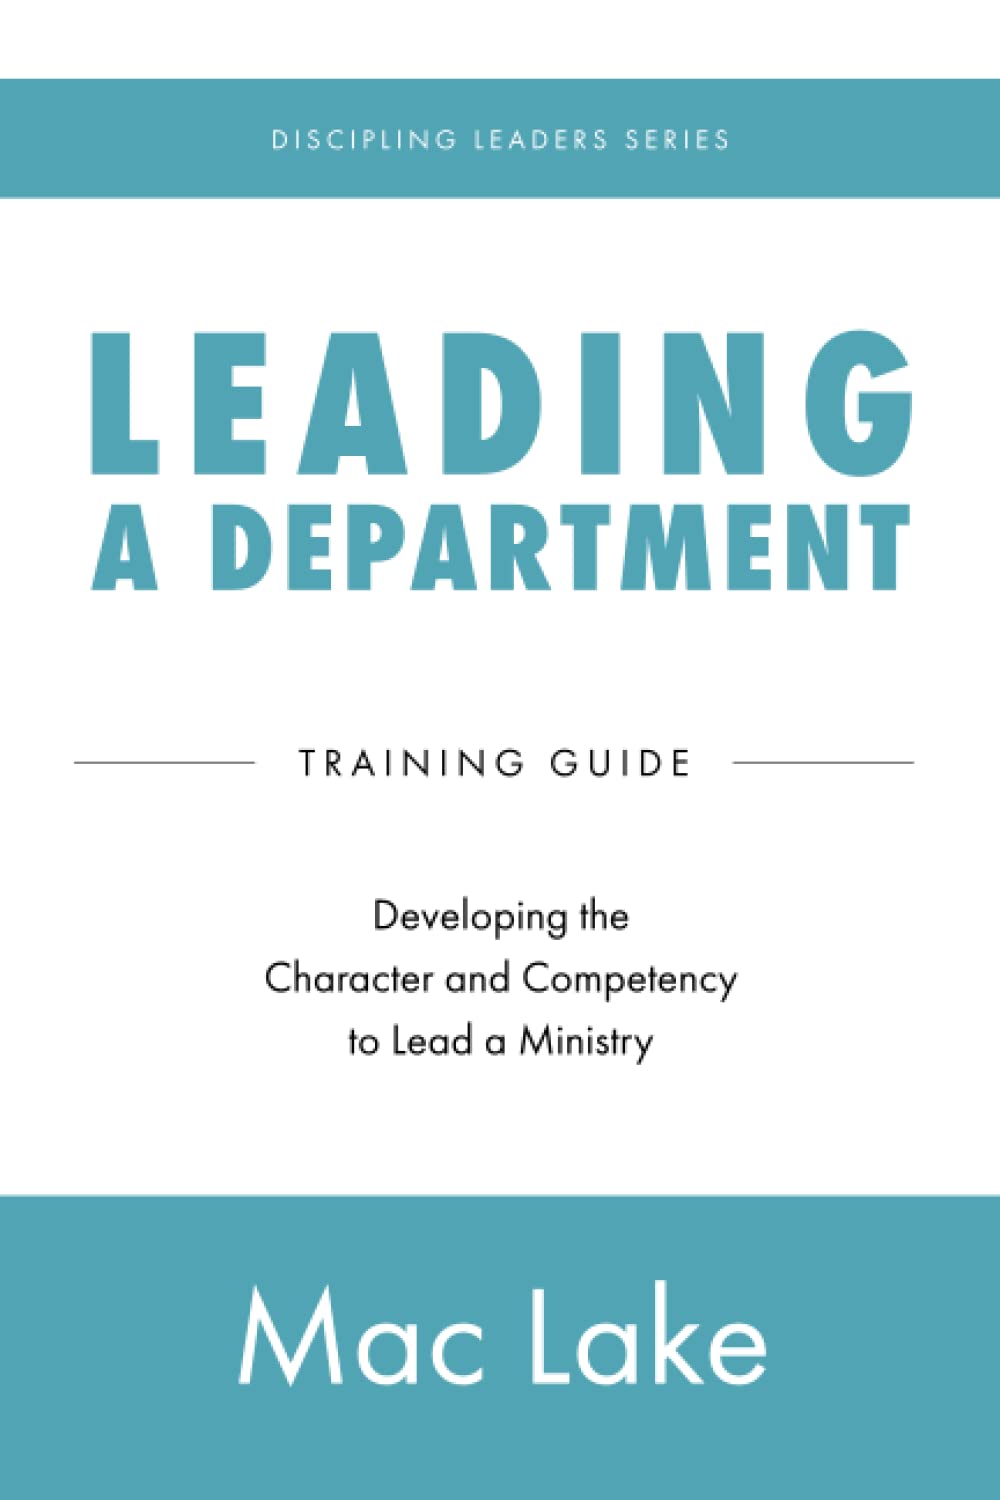 Leading a Department